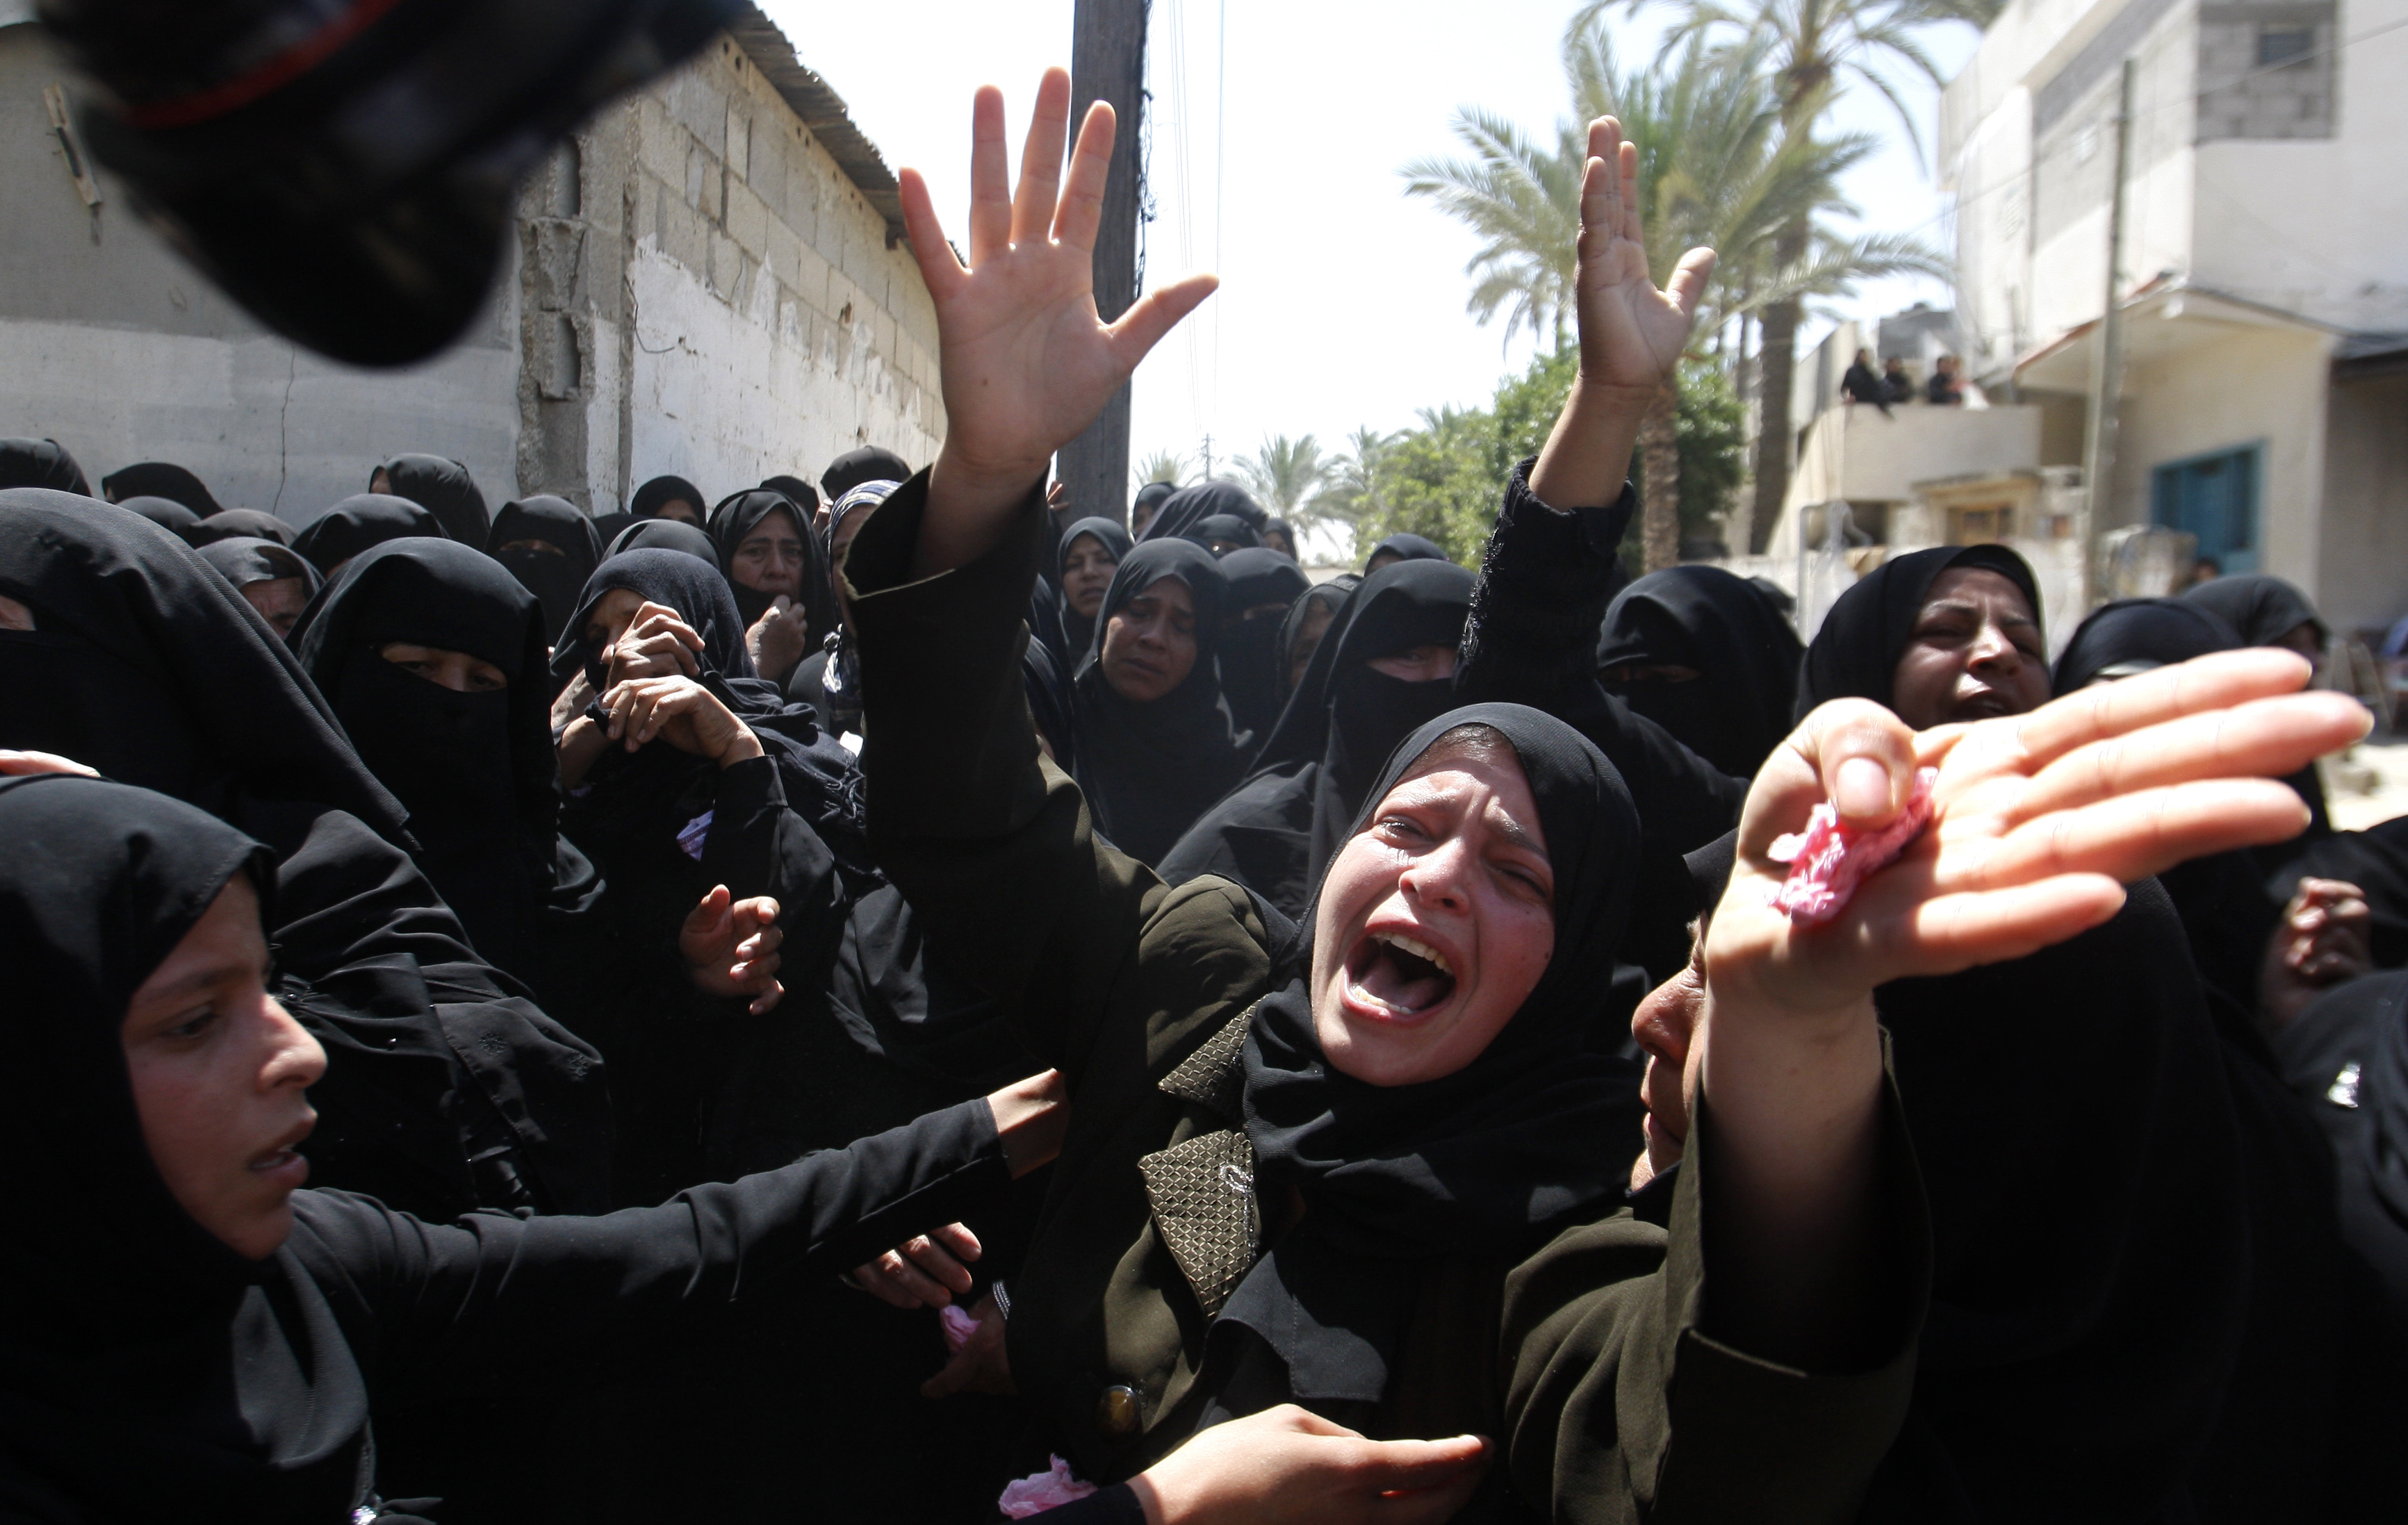 Women mourn during the funeral of Ahmed Abu Nasr, an Islamic Jihad militant, at the Khan Younis Refugee Camp, Saturday, June 2, 2012. Abu Nasr and an Israeli soldier were killed in a shootout near the border with the Gaza Strip on Friday, the Israeli military said. The exchange of gunfire began after the militant crossed the fence separating the Hamas-run coastal strip and southern Israel. (AP photo/Hatem Moussa)